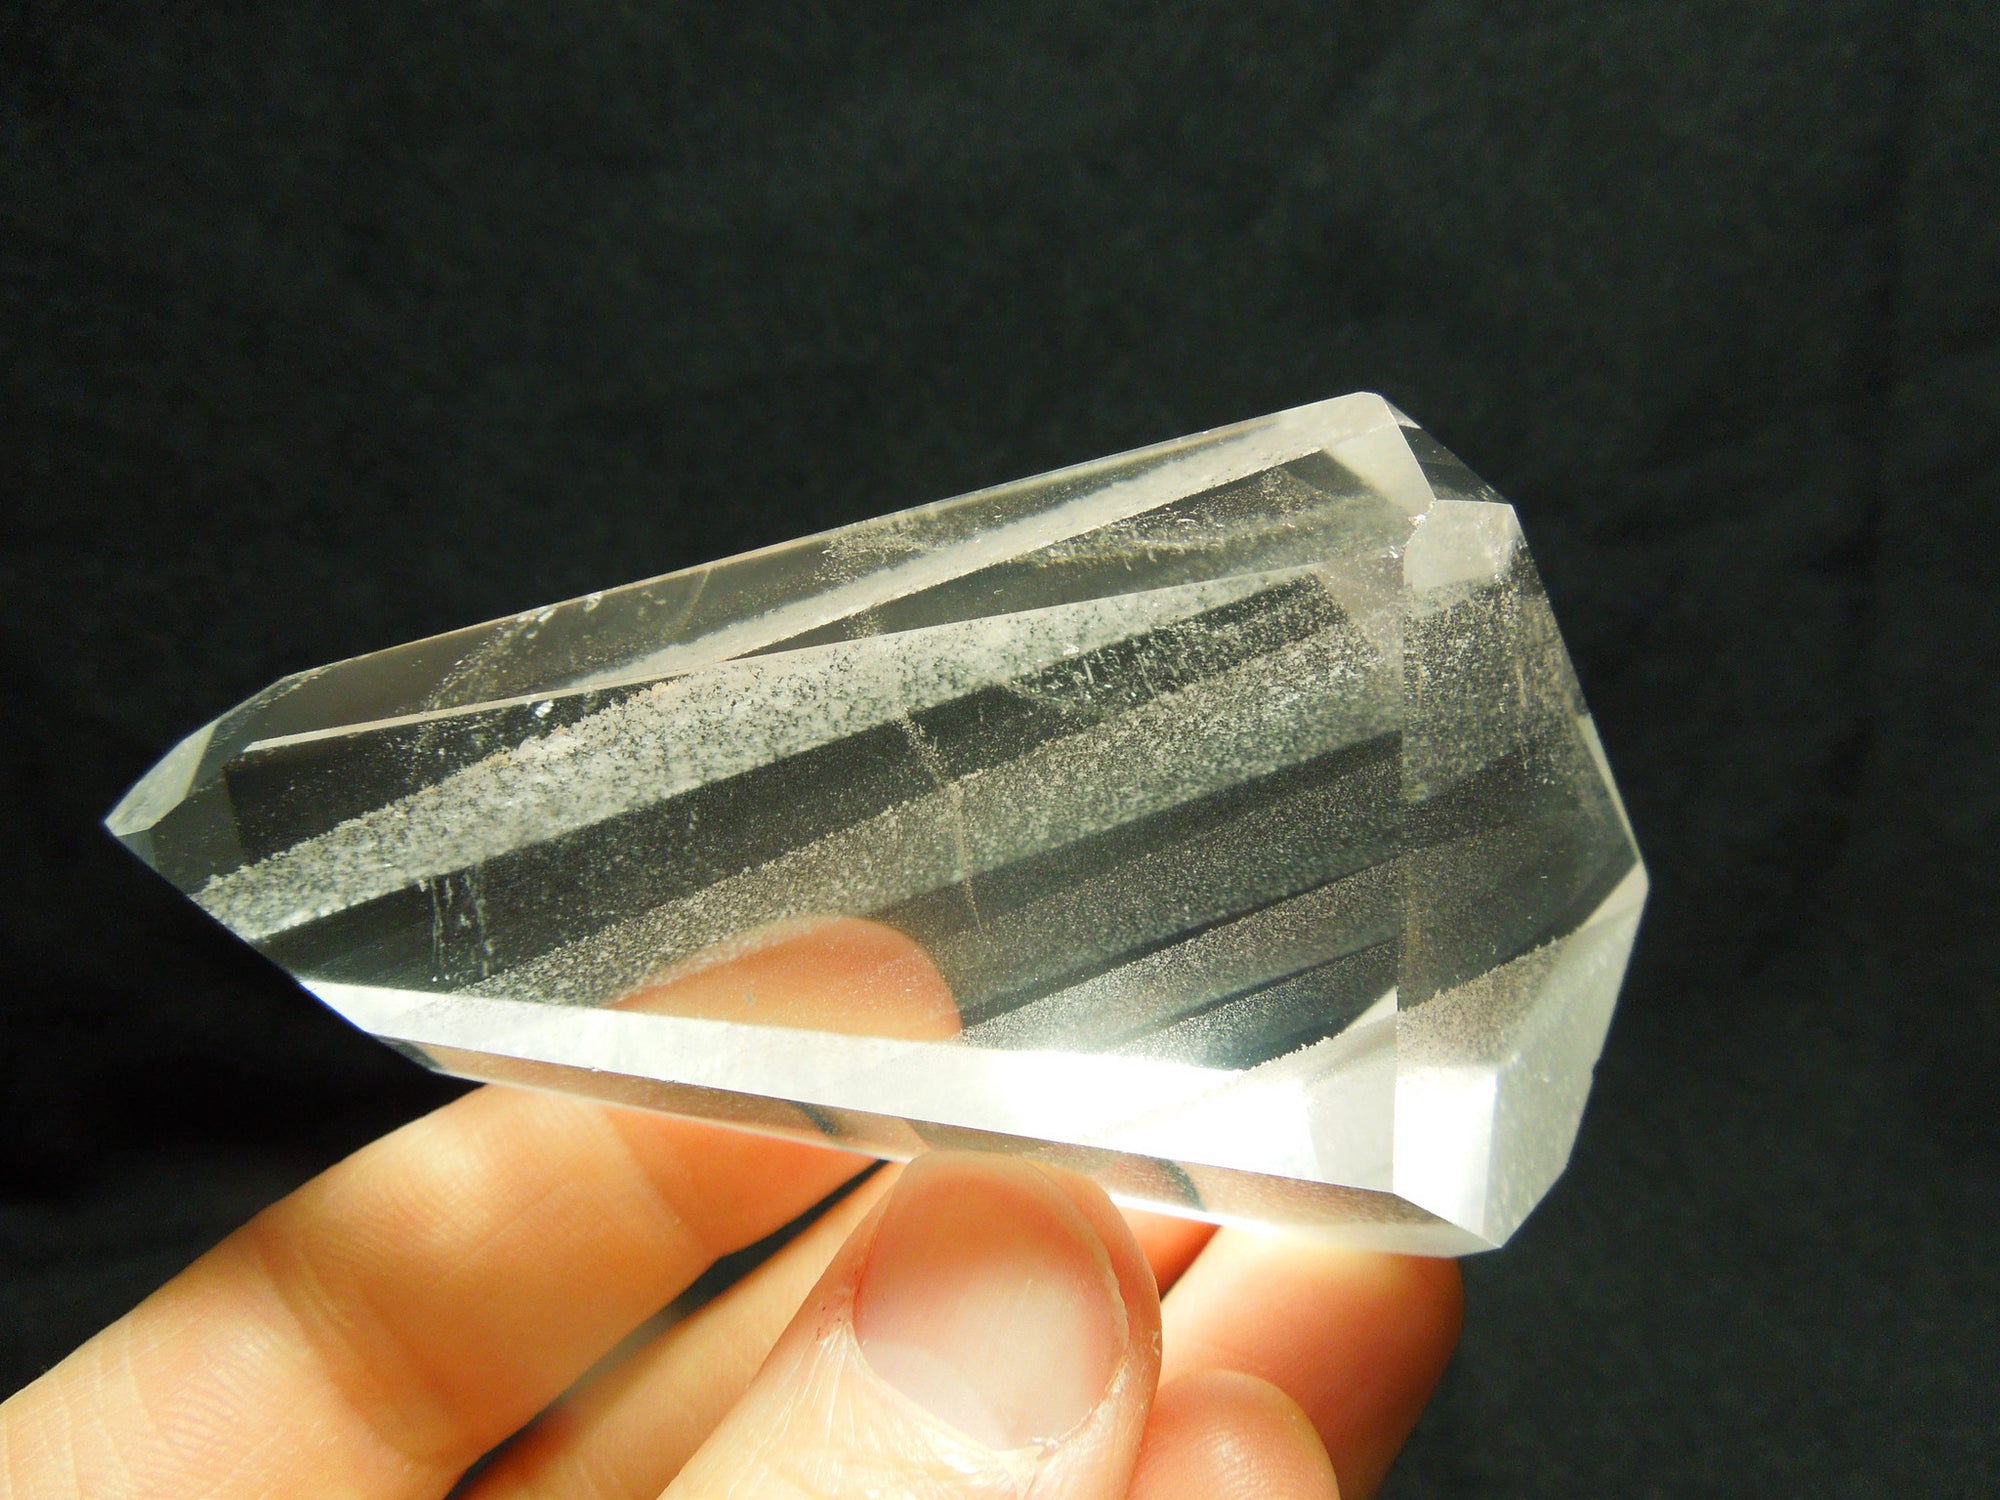 Double Terminated Quartz Crystal w/ Inclusions